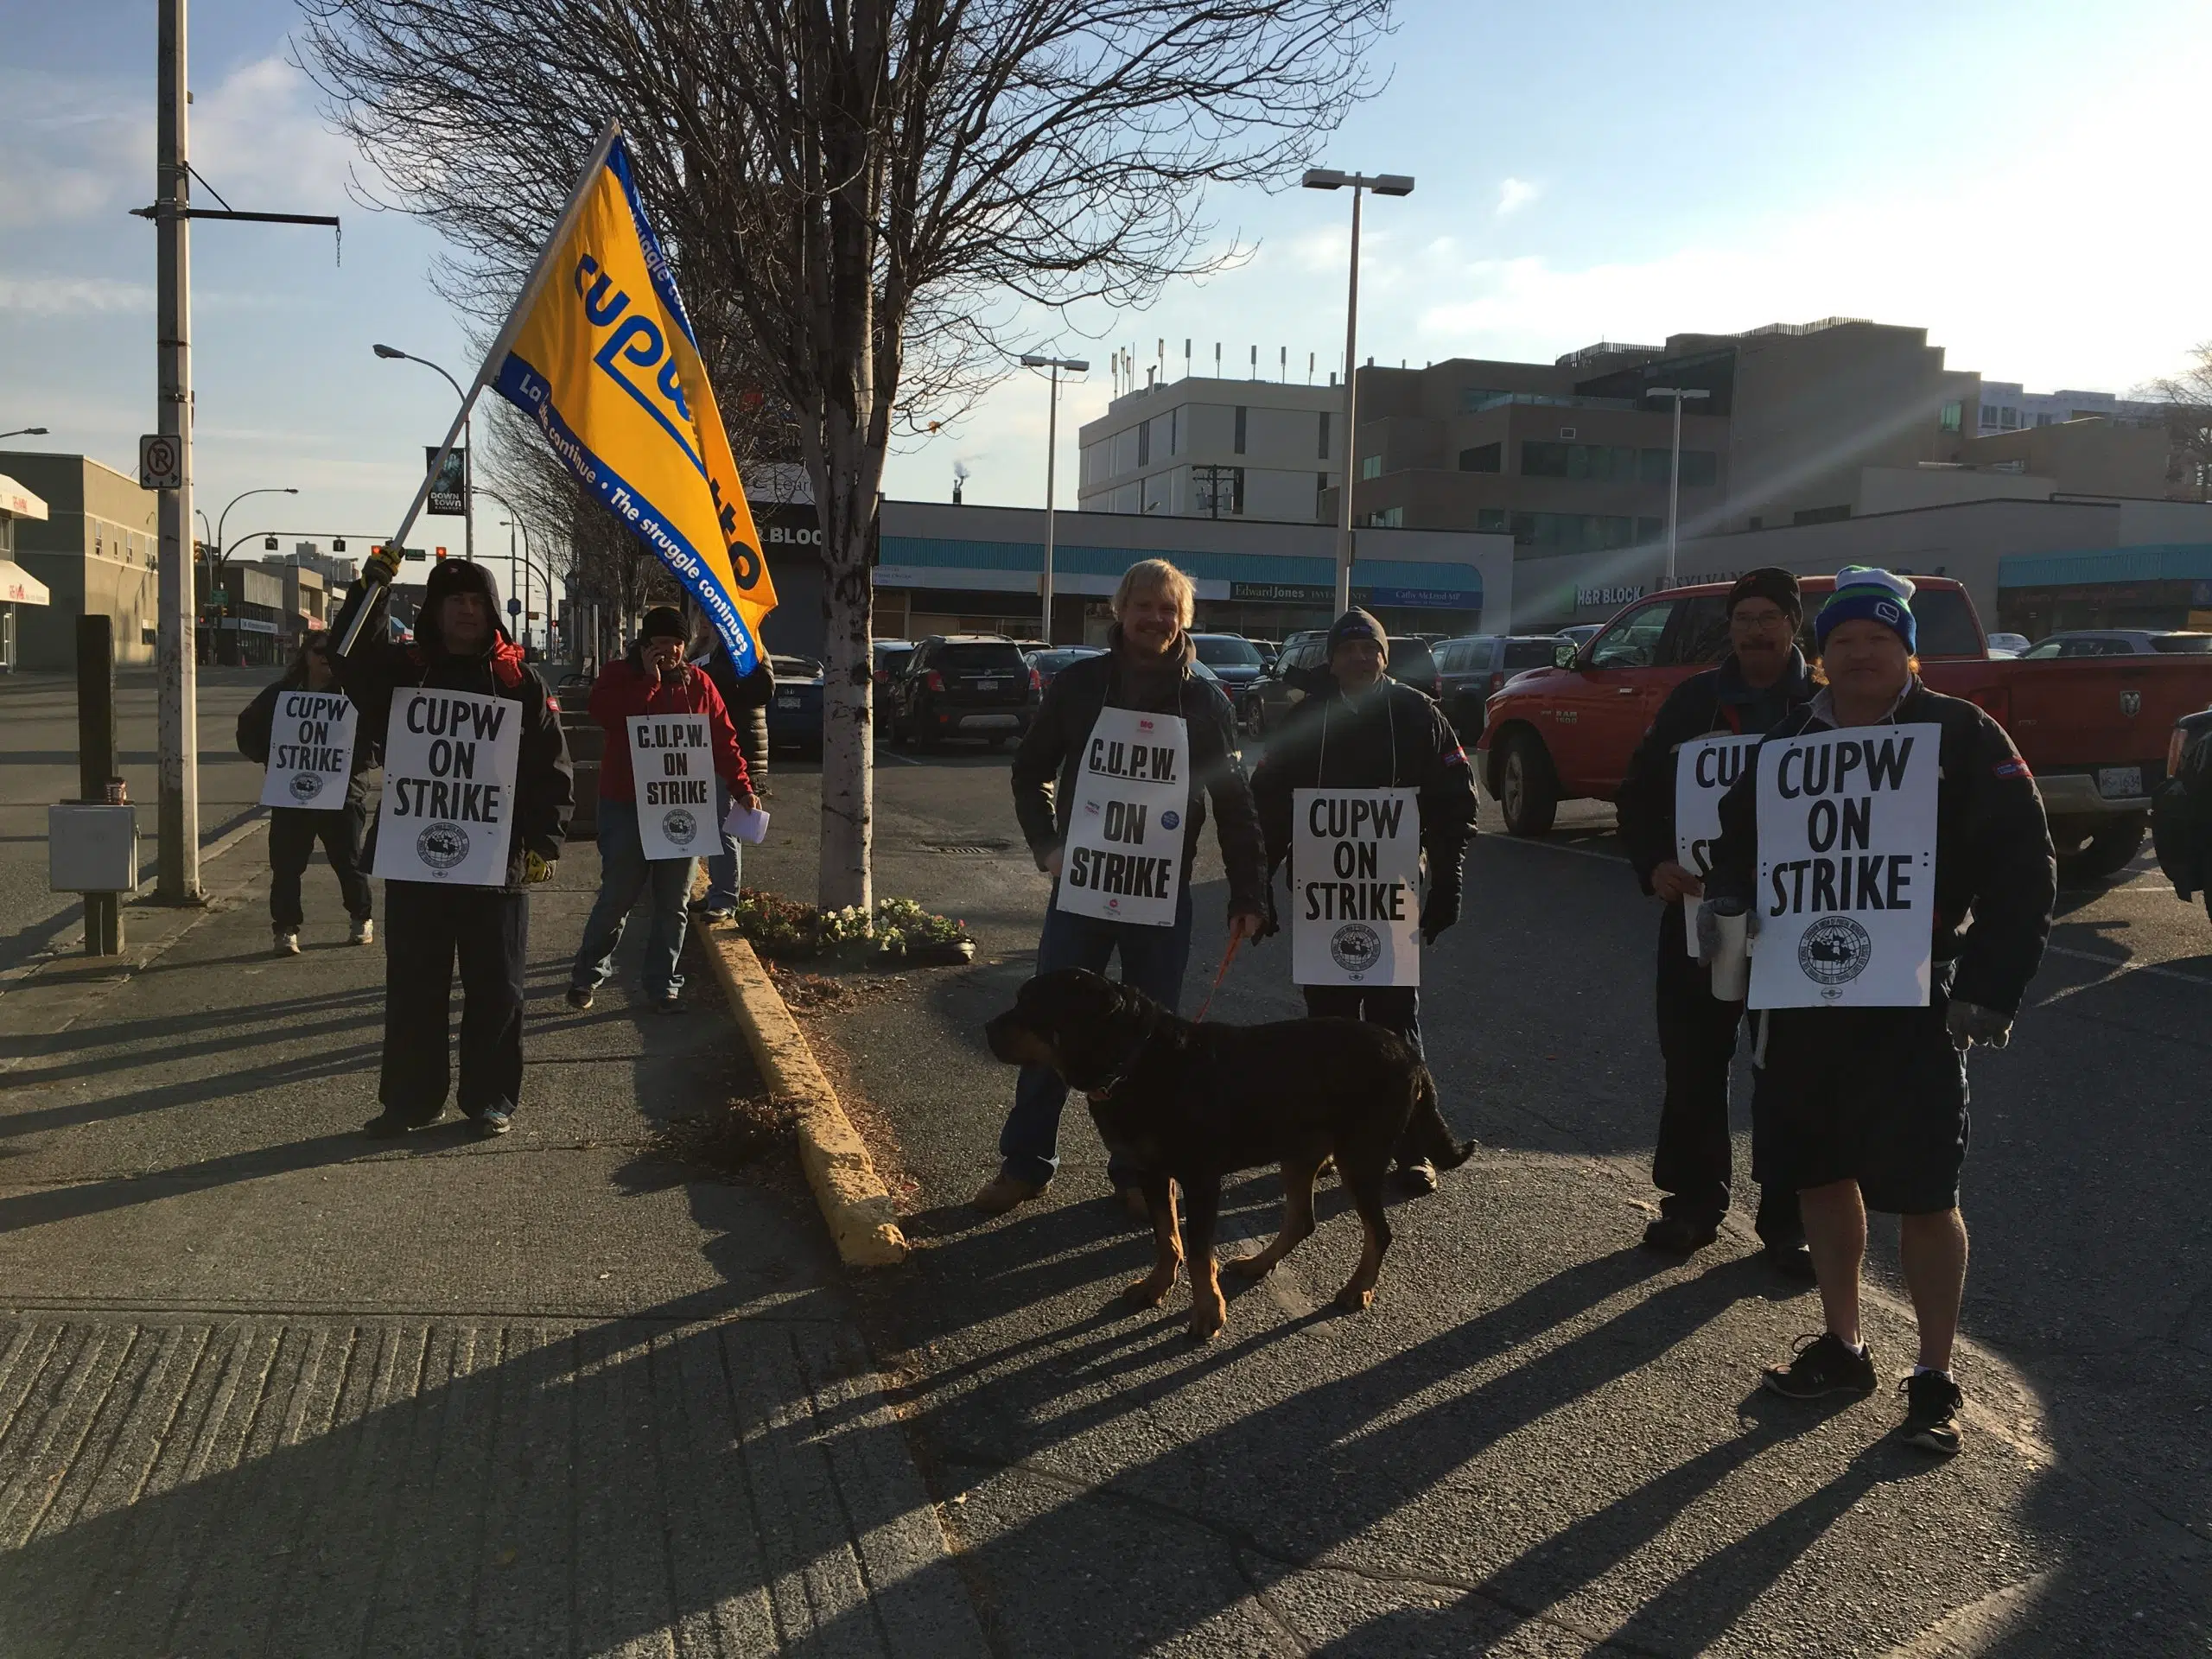 Local Kamloops CUP-W President Says Rotating Strikes Could Escalate